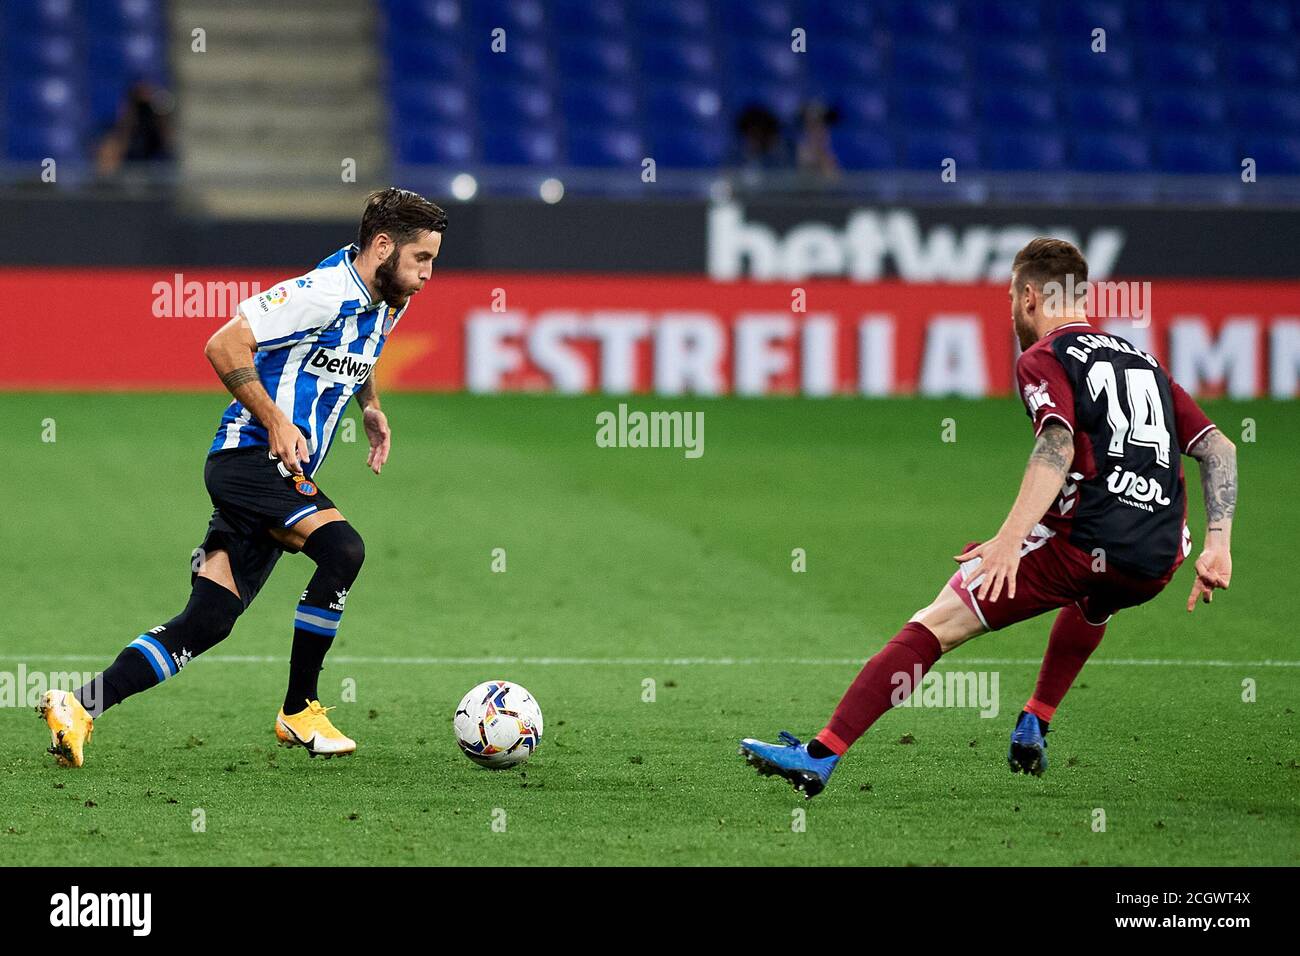 Barcelona, Spain. 12th Sep, 2020. Llambrich during the Liga SmartBank match between RCD Espanyol and vs Albacete Balompie at RCD Stadium on September 12, 2020 in Barcelona, Spain. Credit: Dax Images/Alamy Live News Stock Photo